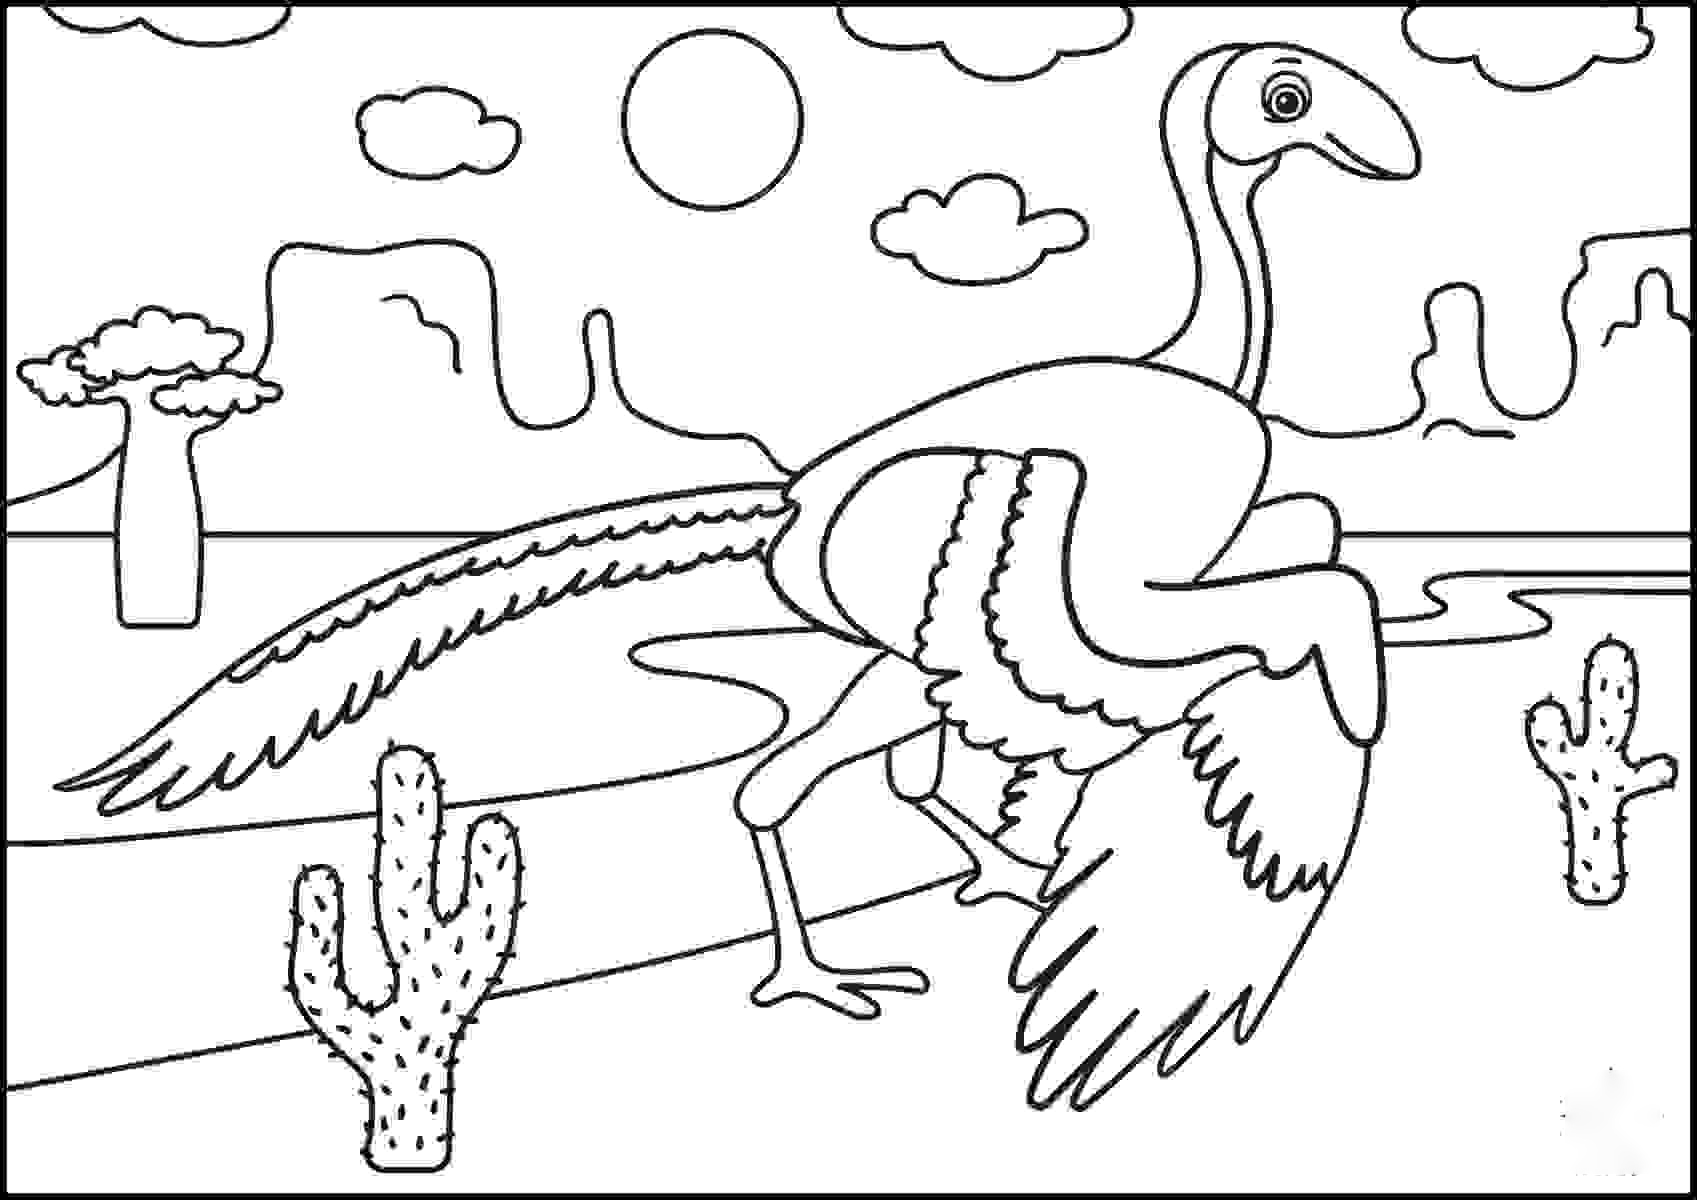 Archaeopteryx Dinosaur drawing simple for preschool Coloring Page